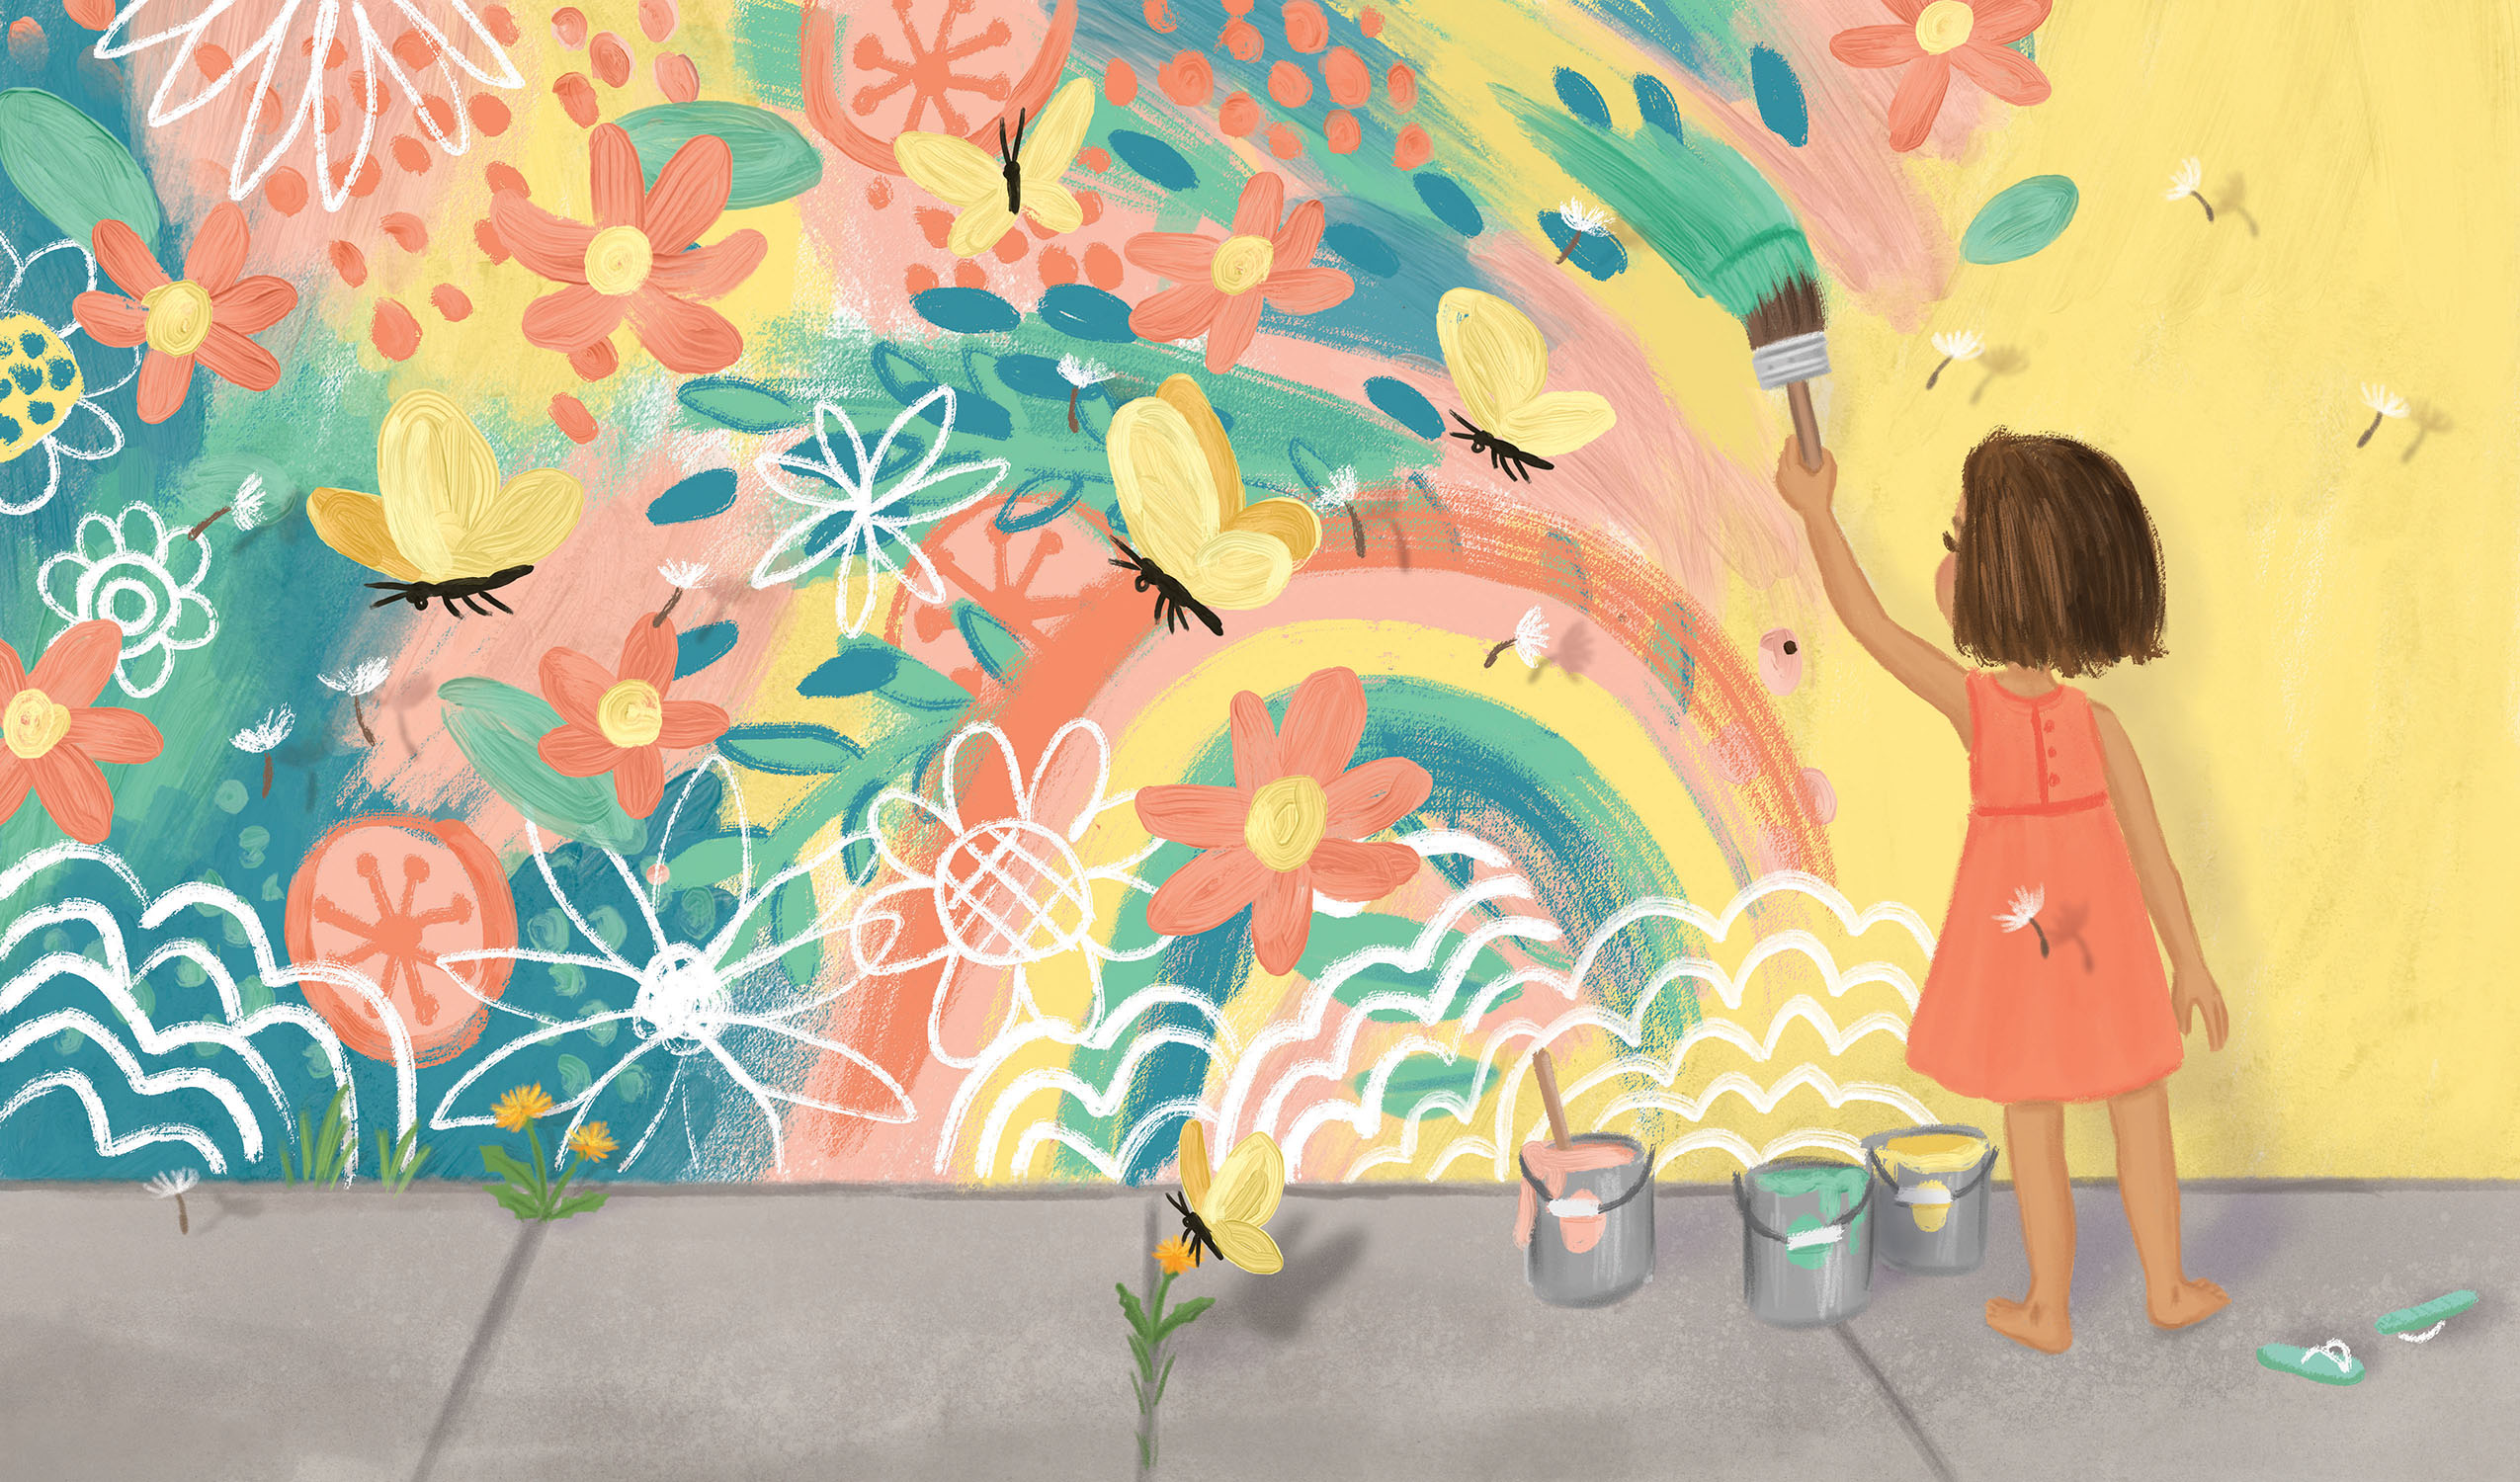 Illustration by Talitha Shipman of a little girl painting a mural. Illustration is called "Finding Beauty Mural"